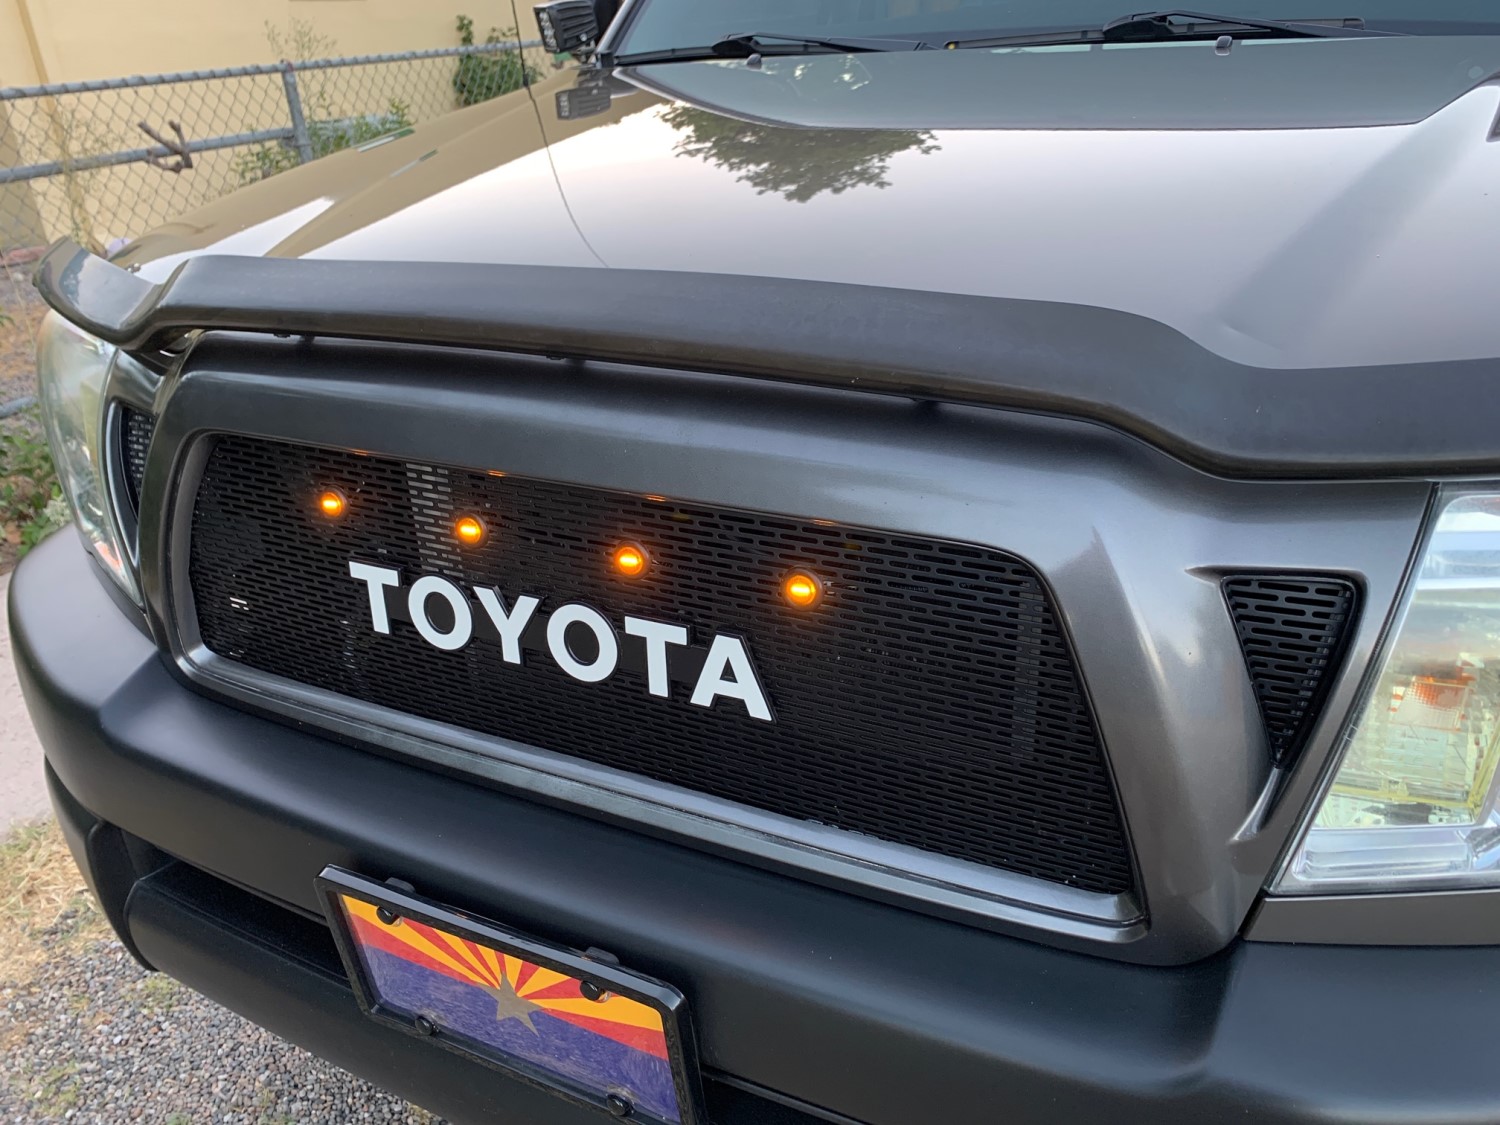 2005 - 2011 Toyota Tacoma Mesh Grill With Toyota Emblem #3